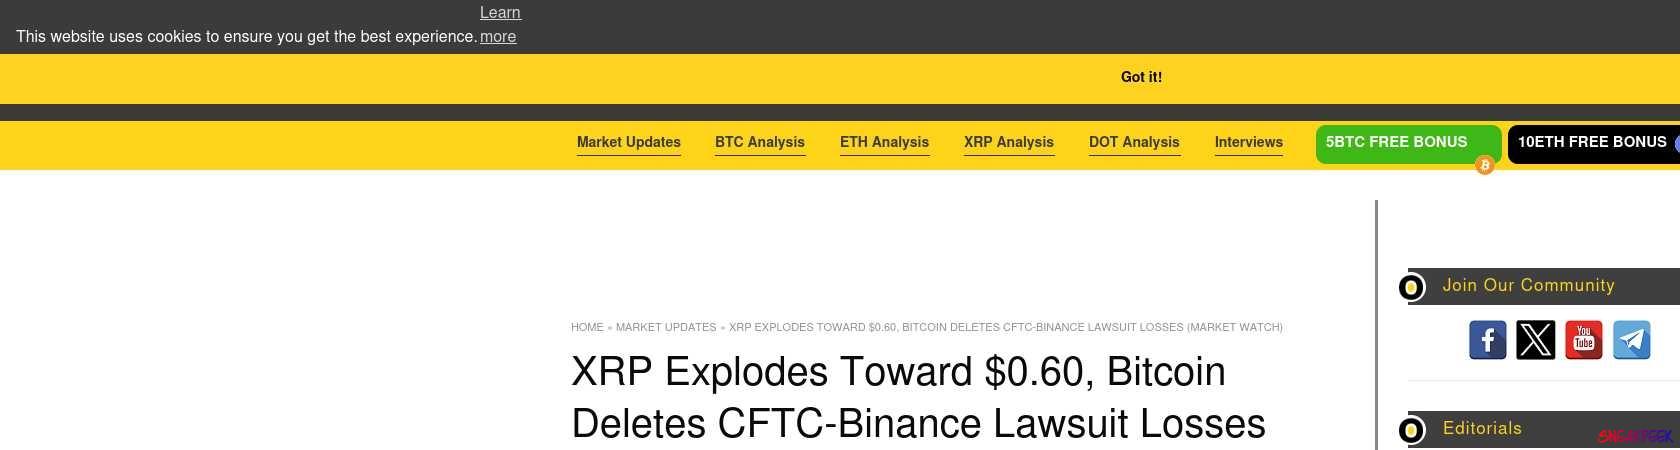 Read the full Article:  ⭲ XRP Explodes Toward $0.60, Bitcoin Deletes CFTC-Binance Lawsuit Losses (Market Watch)